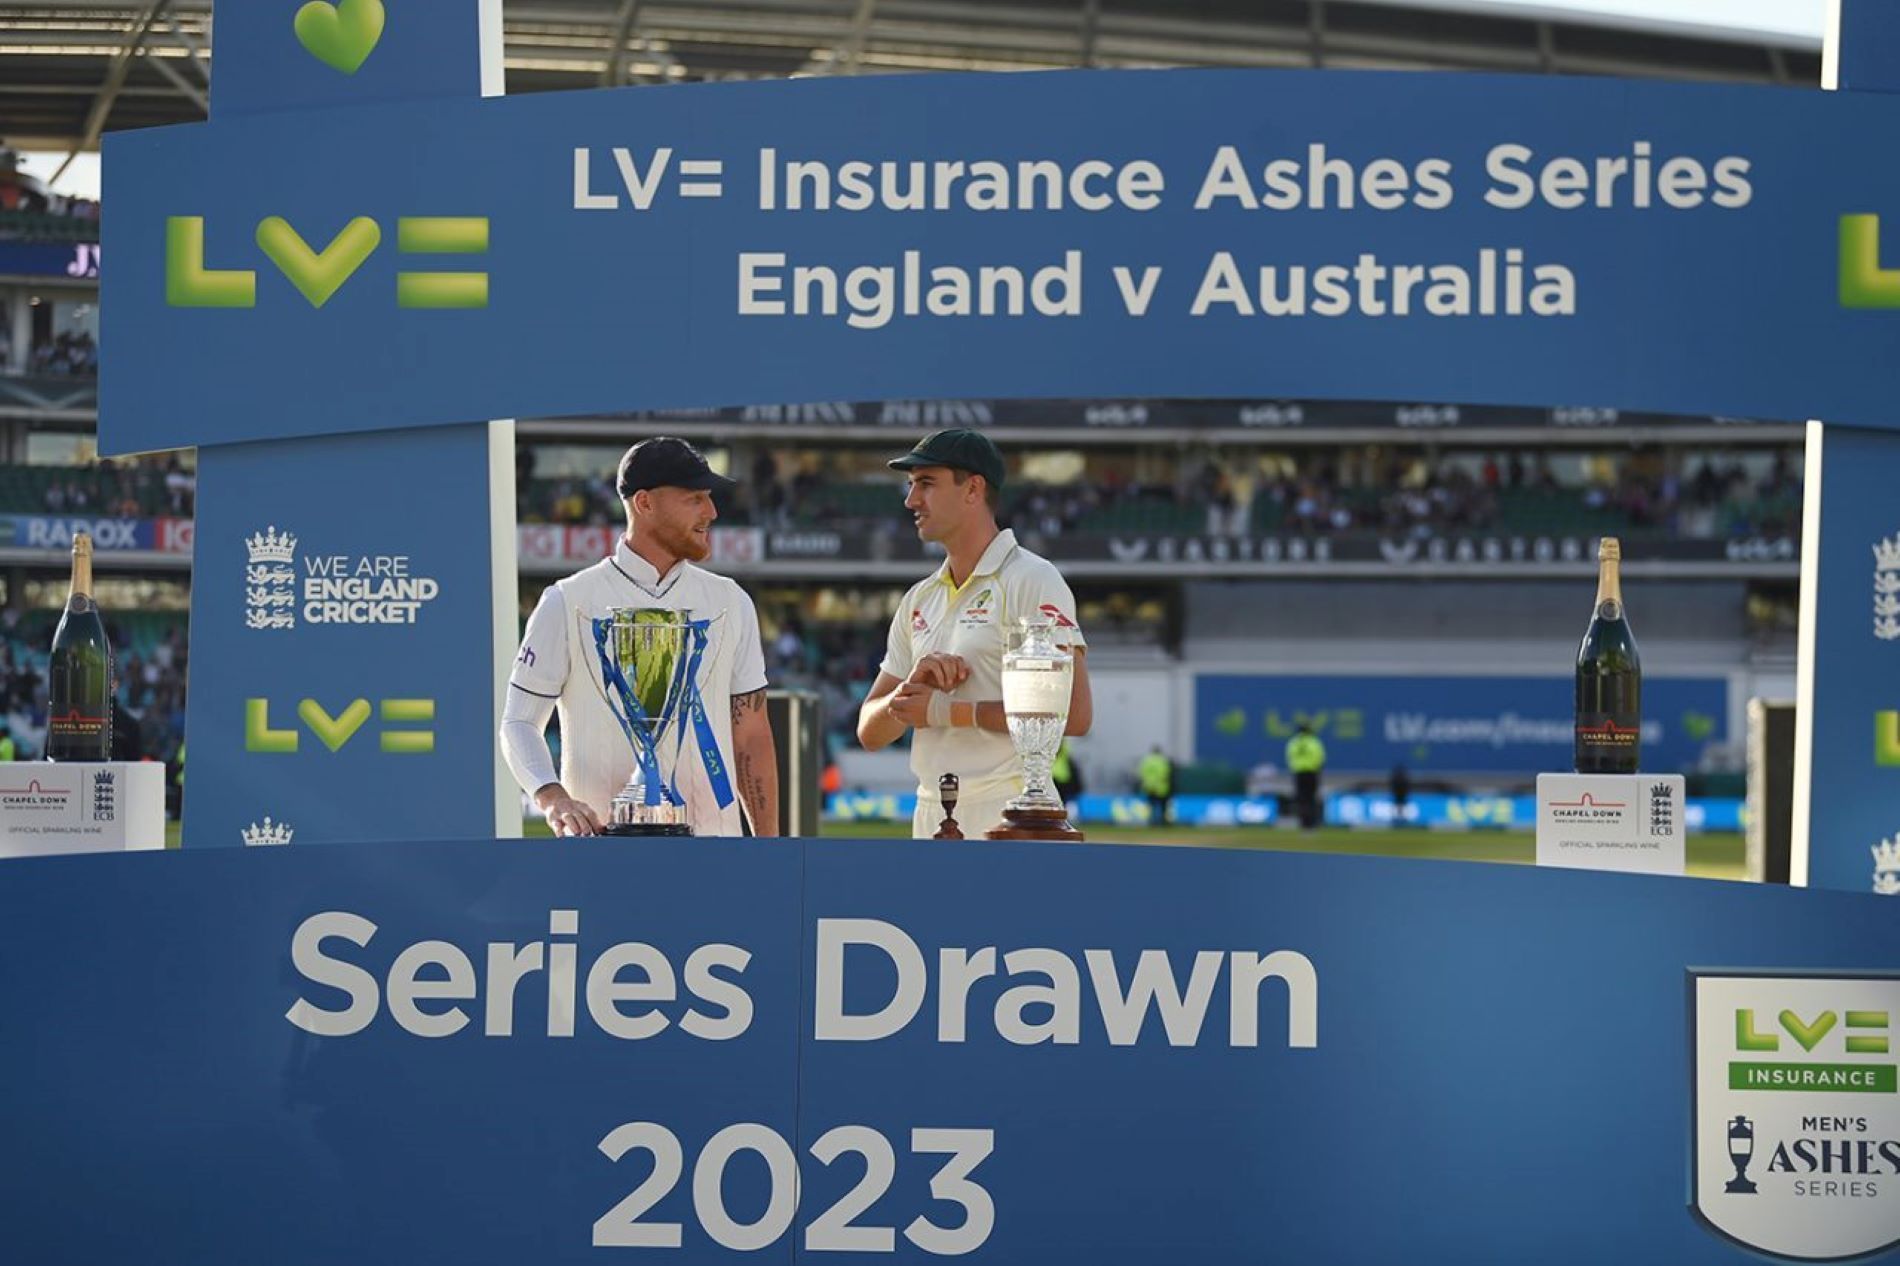 The Ashes series was drawn after five closely contested Tests.